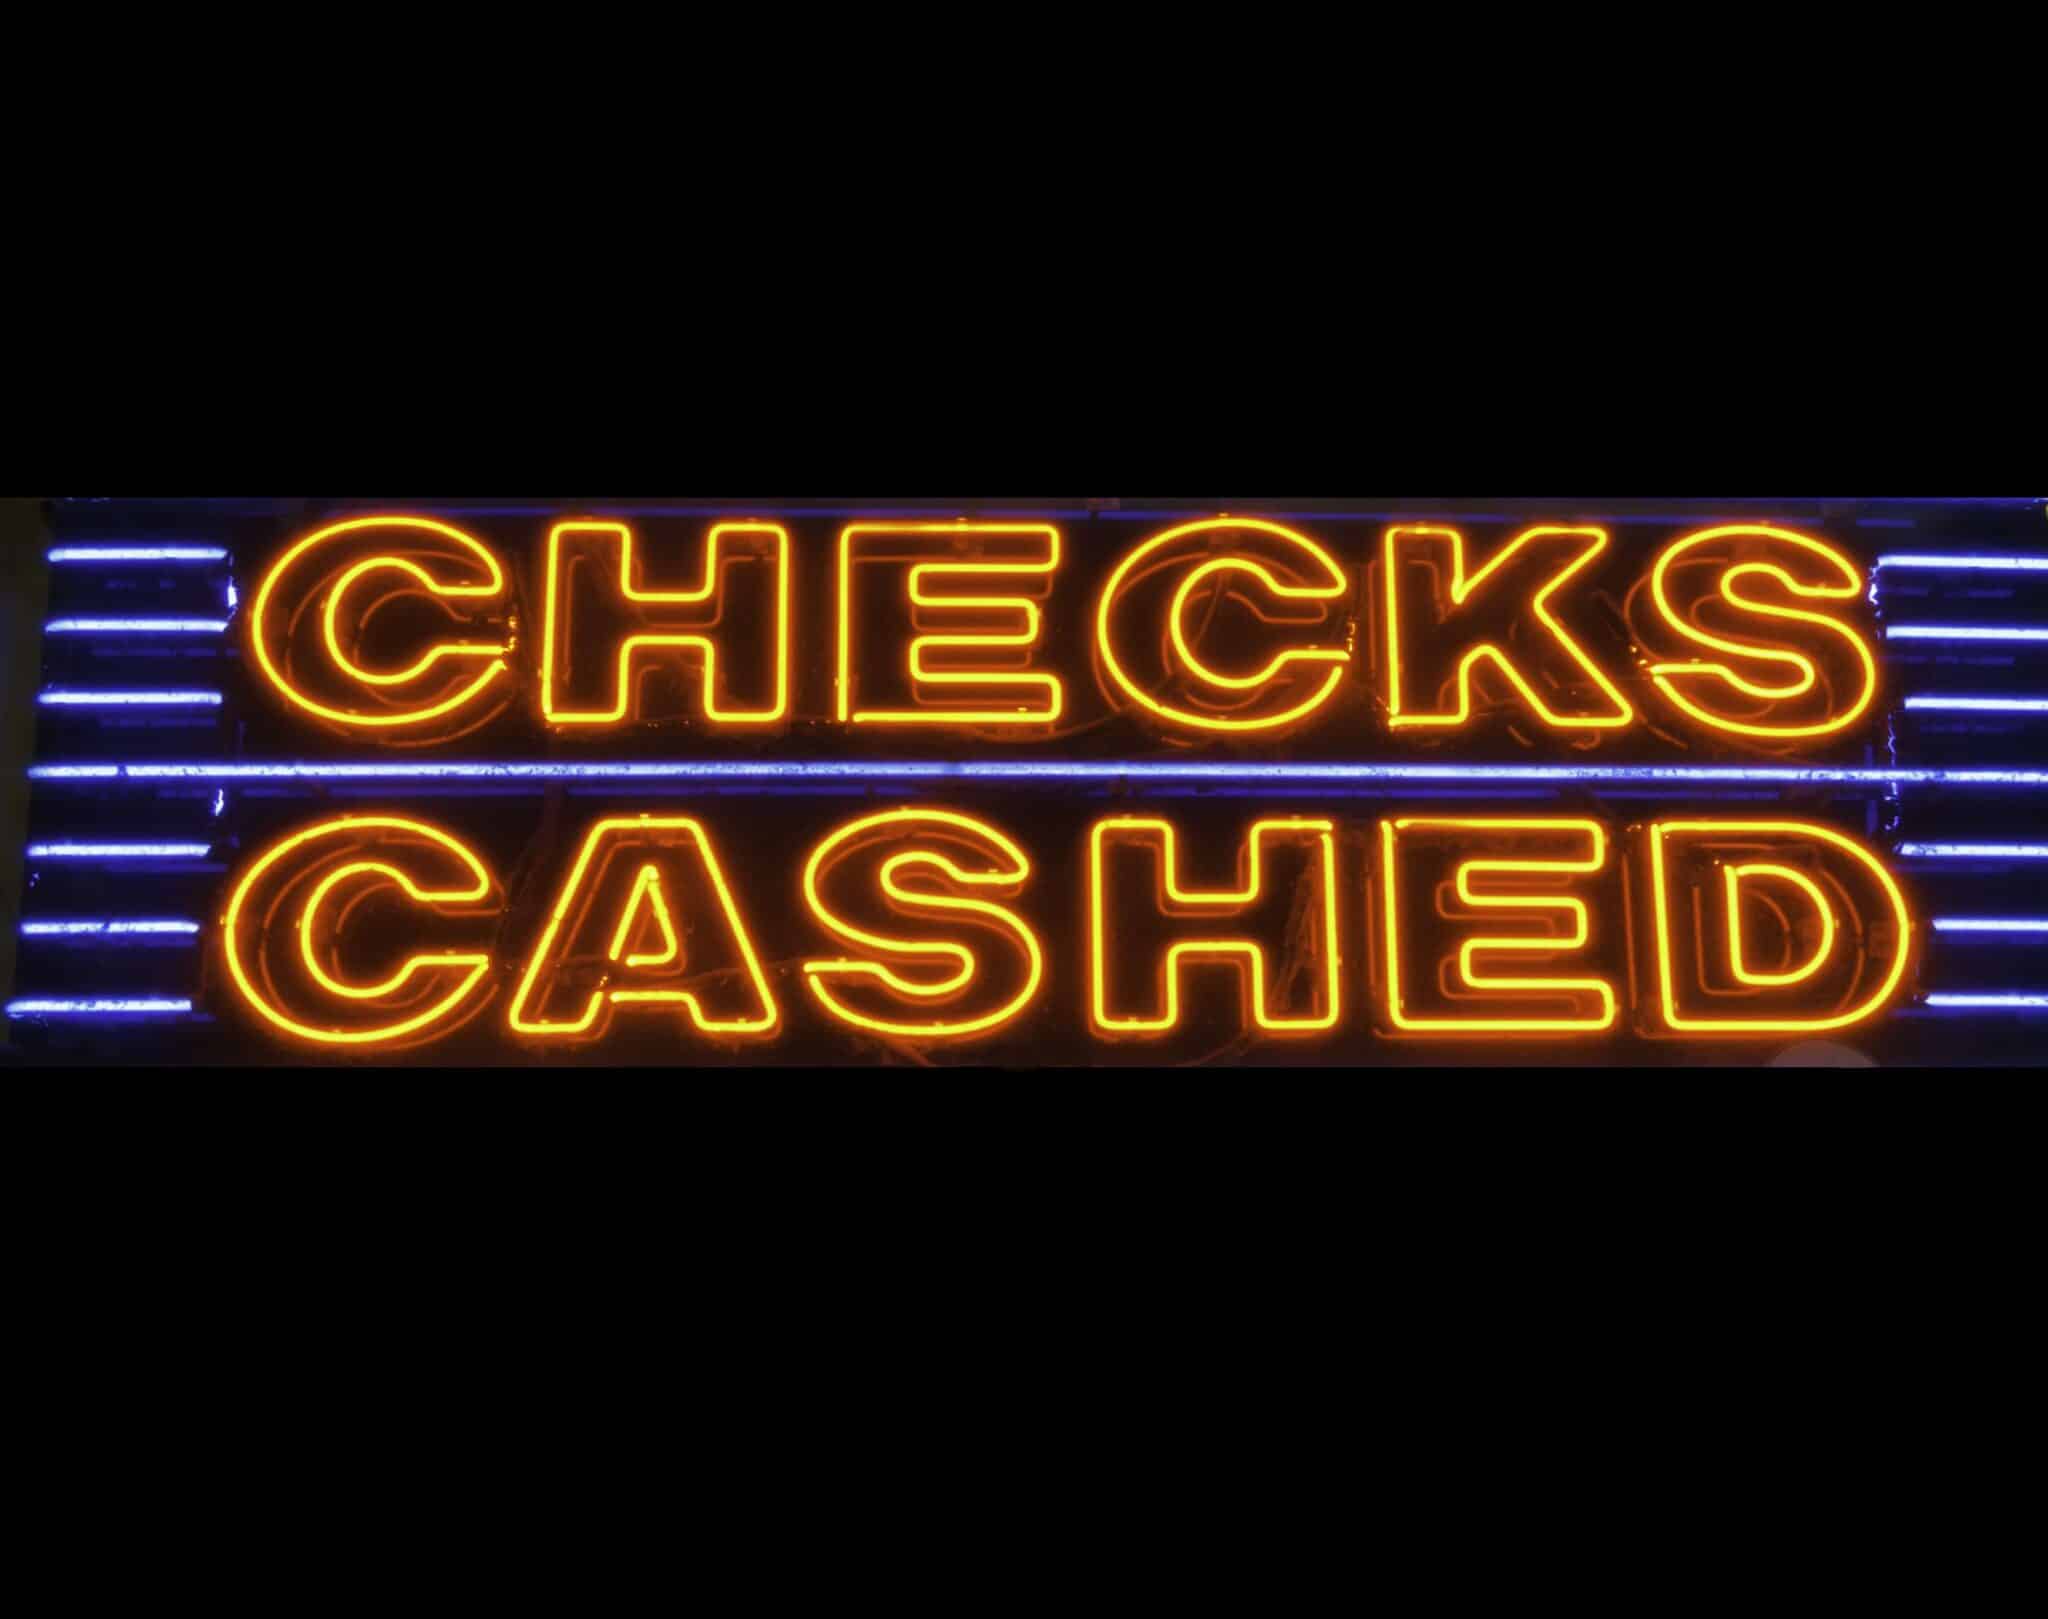 How To Cash a Check: Save Money, Time, and Hassles! ($)